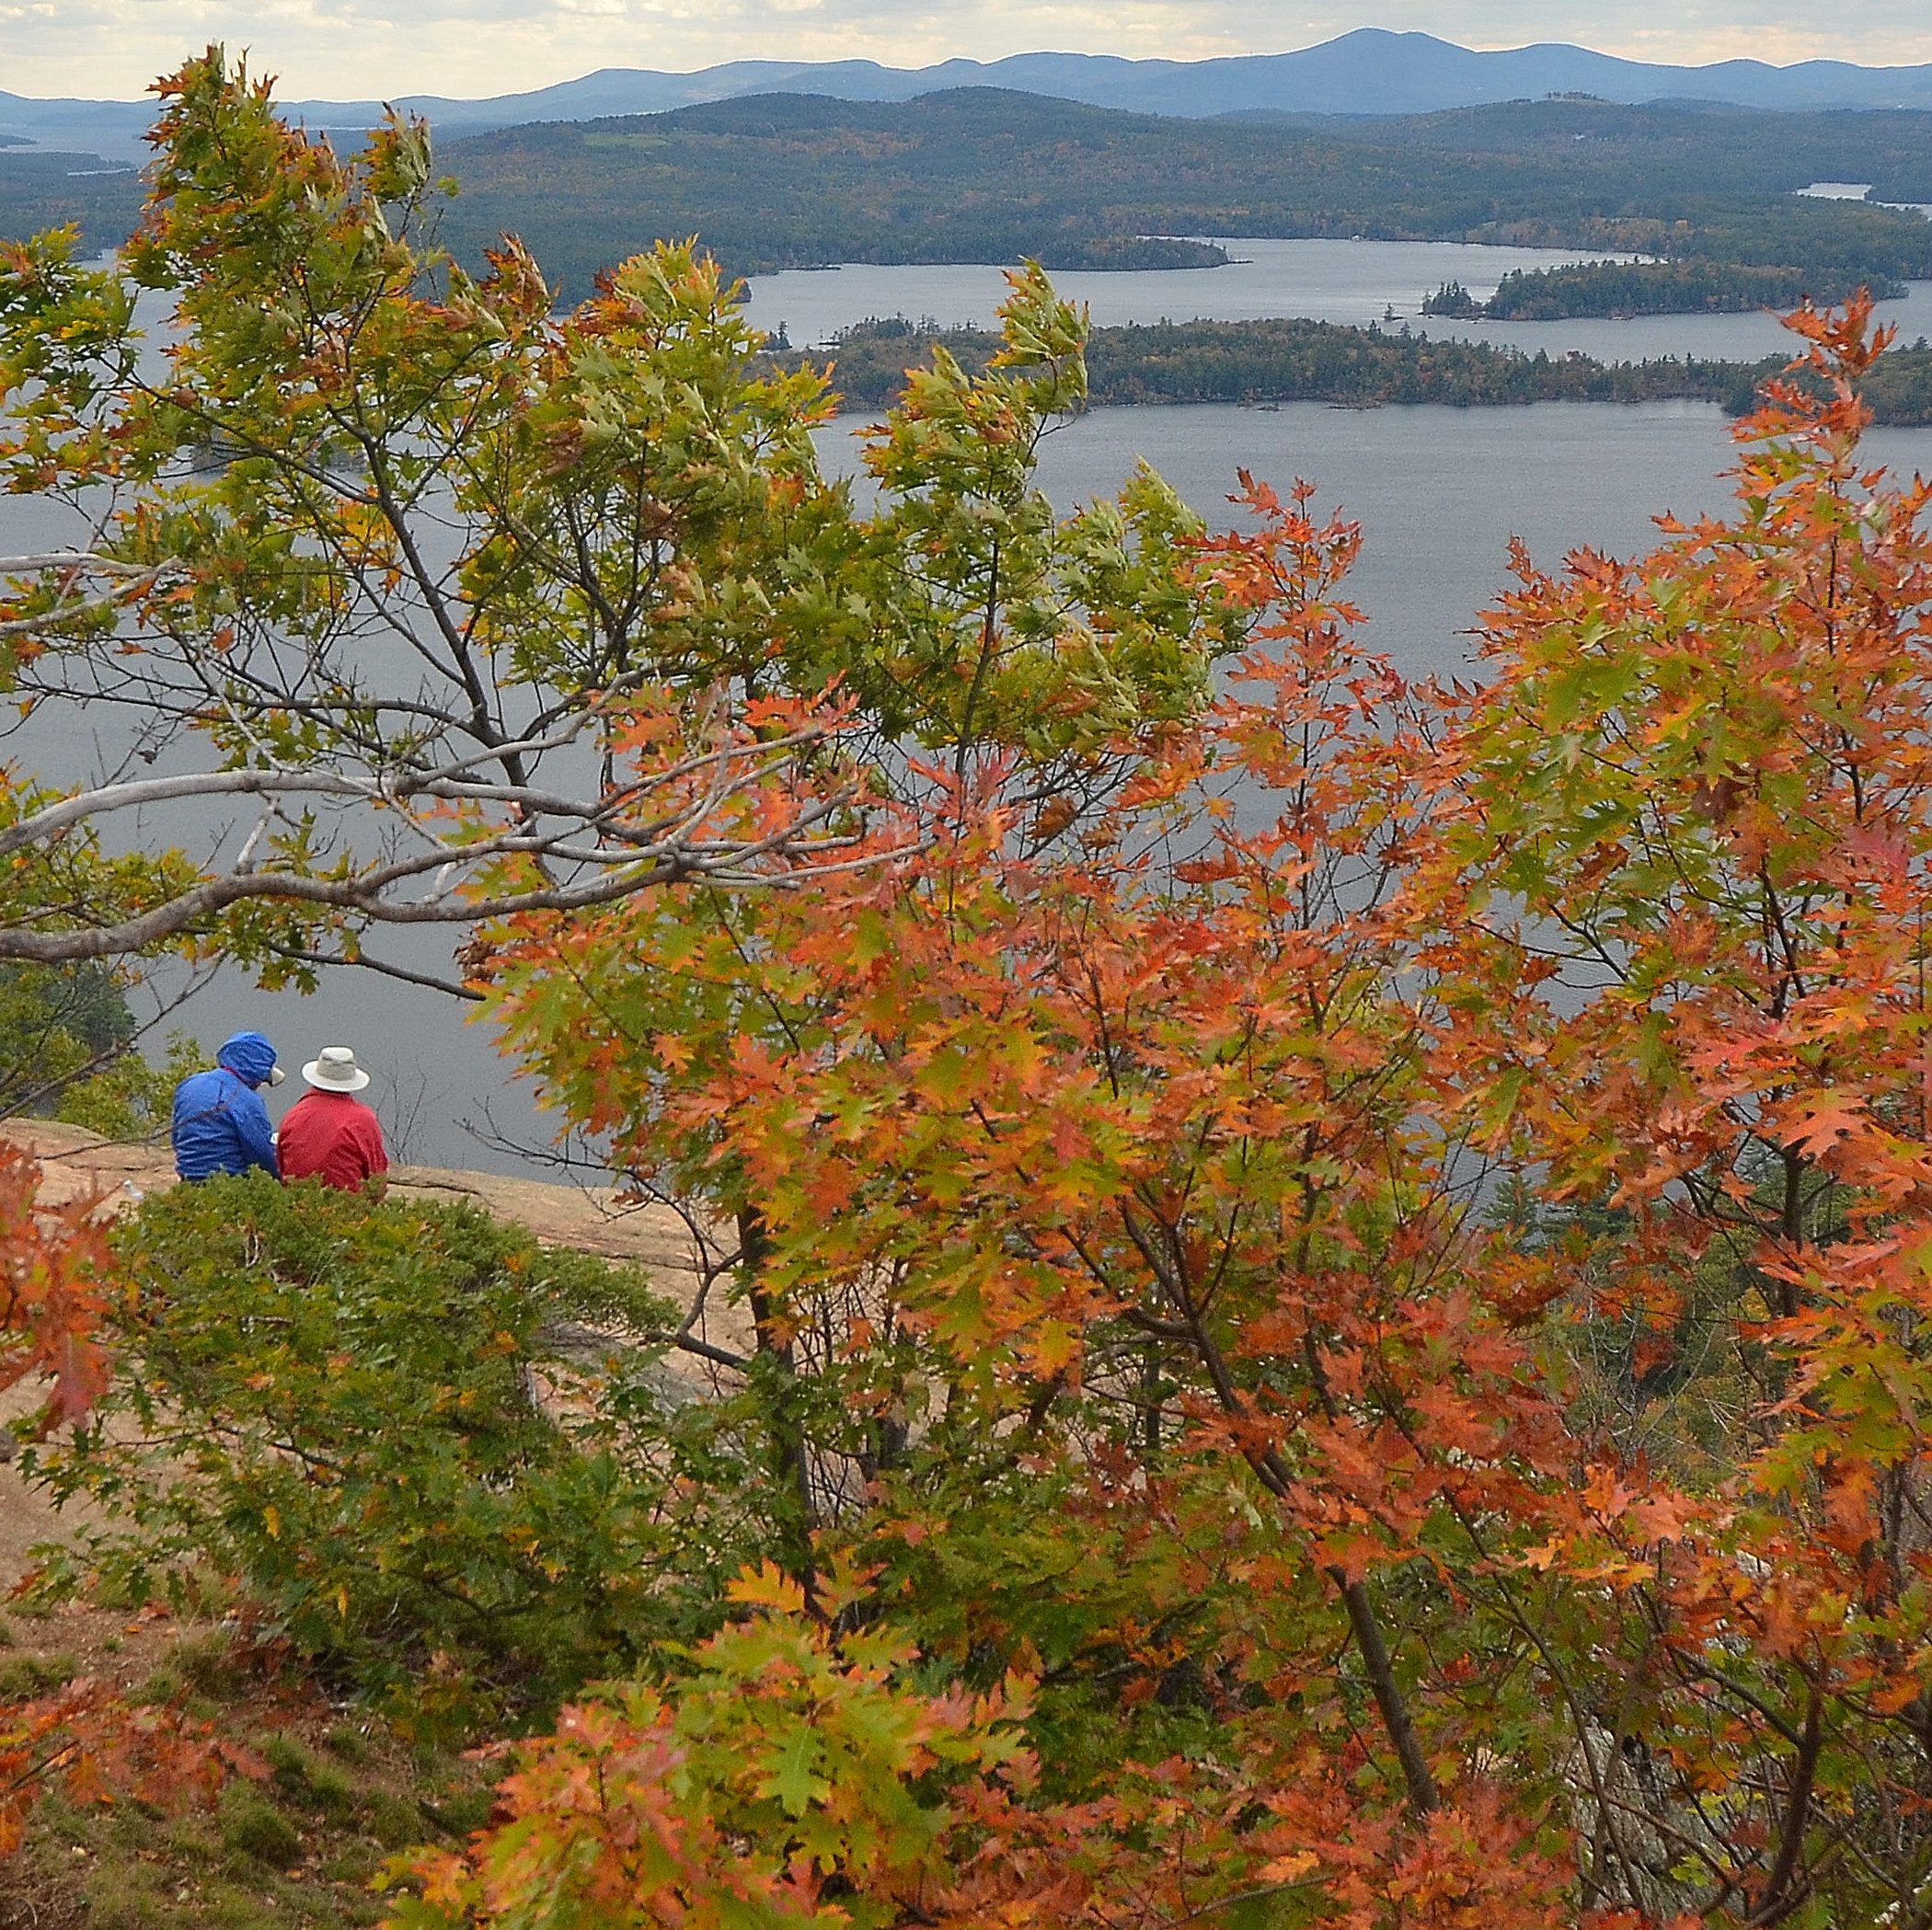 Rattlesanke Point On Squam Lake (user submitted)